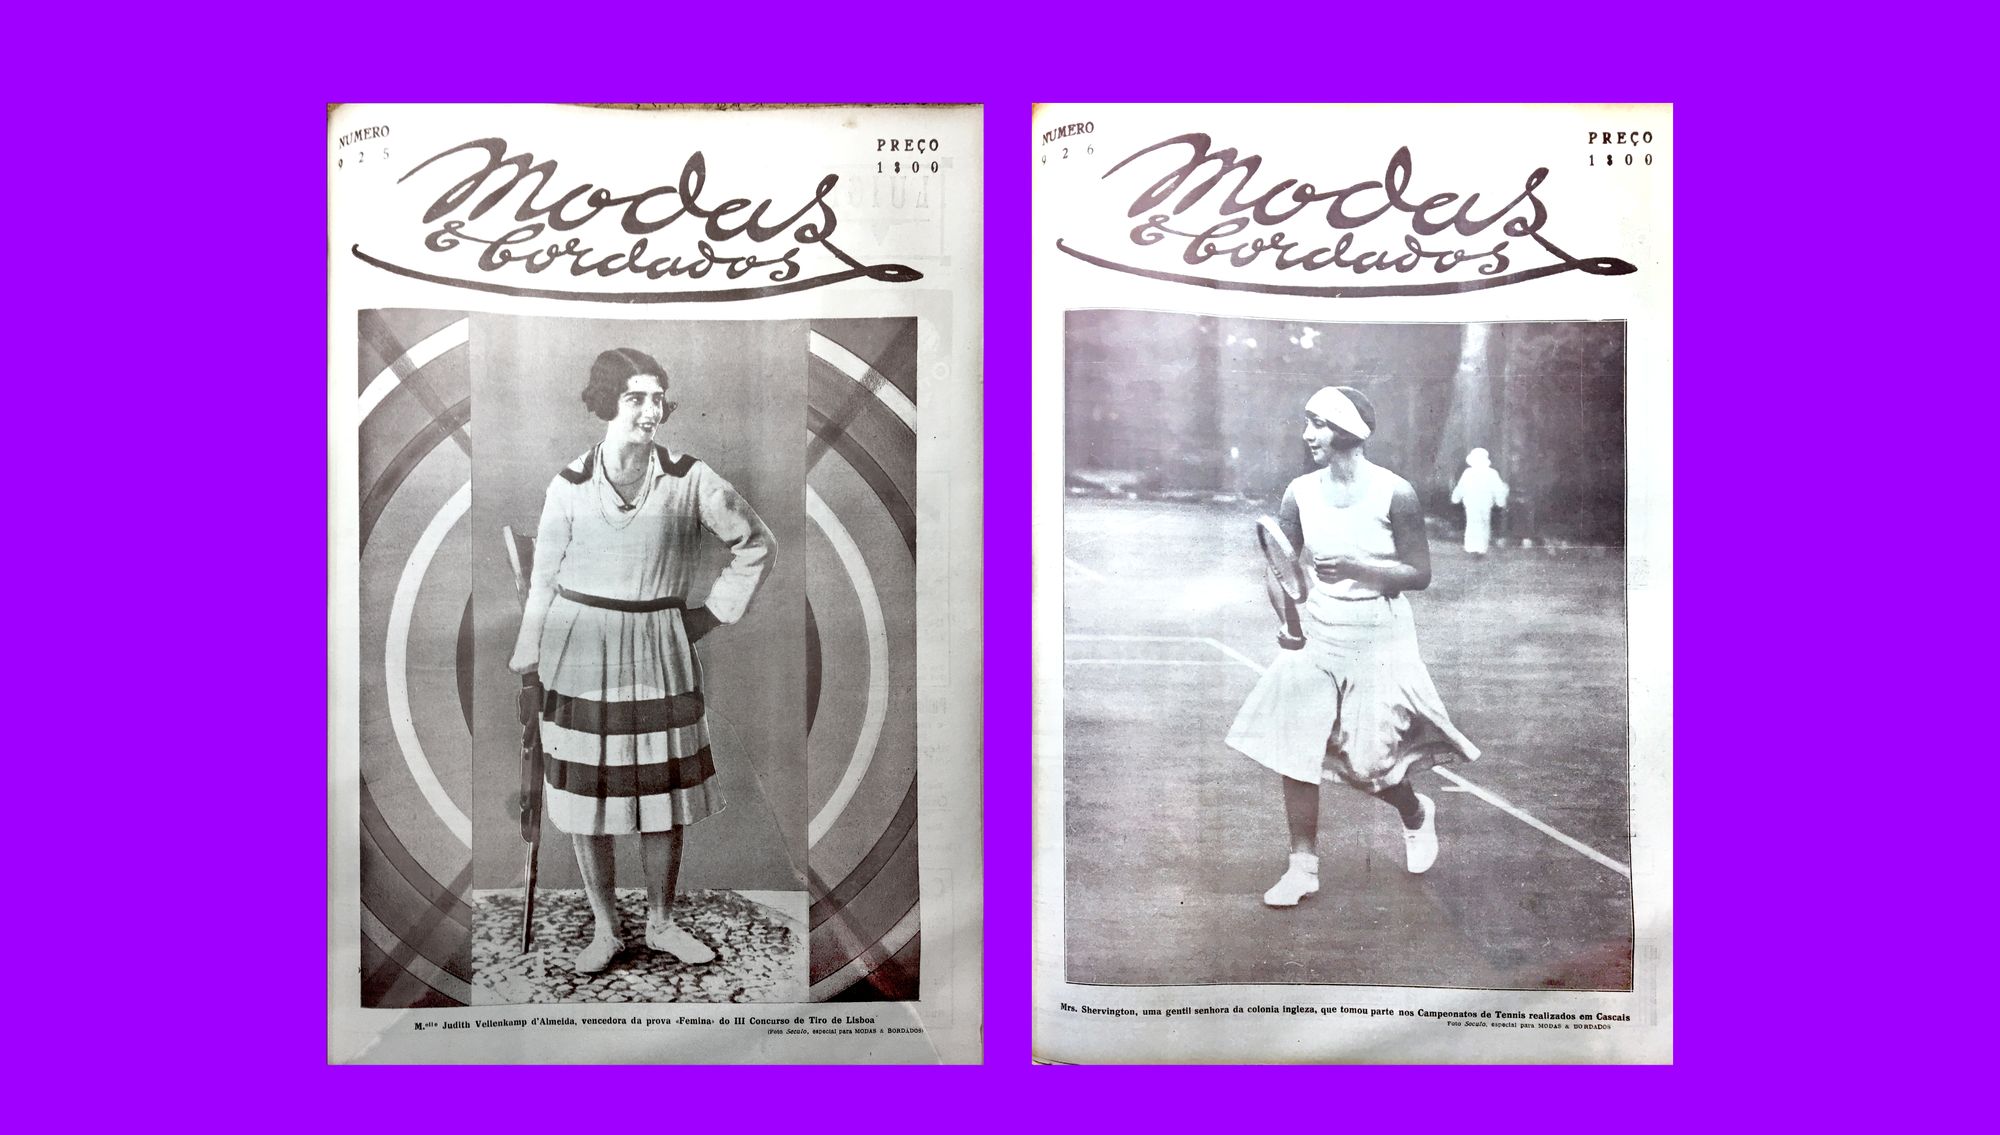 Two covers depicting women engaged in sports. On the left, the cover from October 16, 1929 shows Judith Vellenkamp d’Almeida, the winner of the Lisbon female target shooting competition; on the right, the cover from October 23, 1929 shows Ms. Shervington playing tennis in the championship held outside Lisbon.